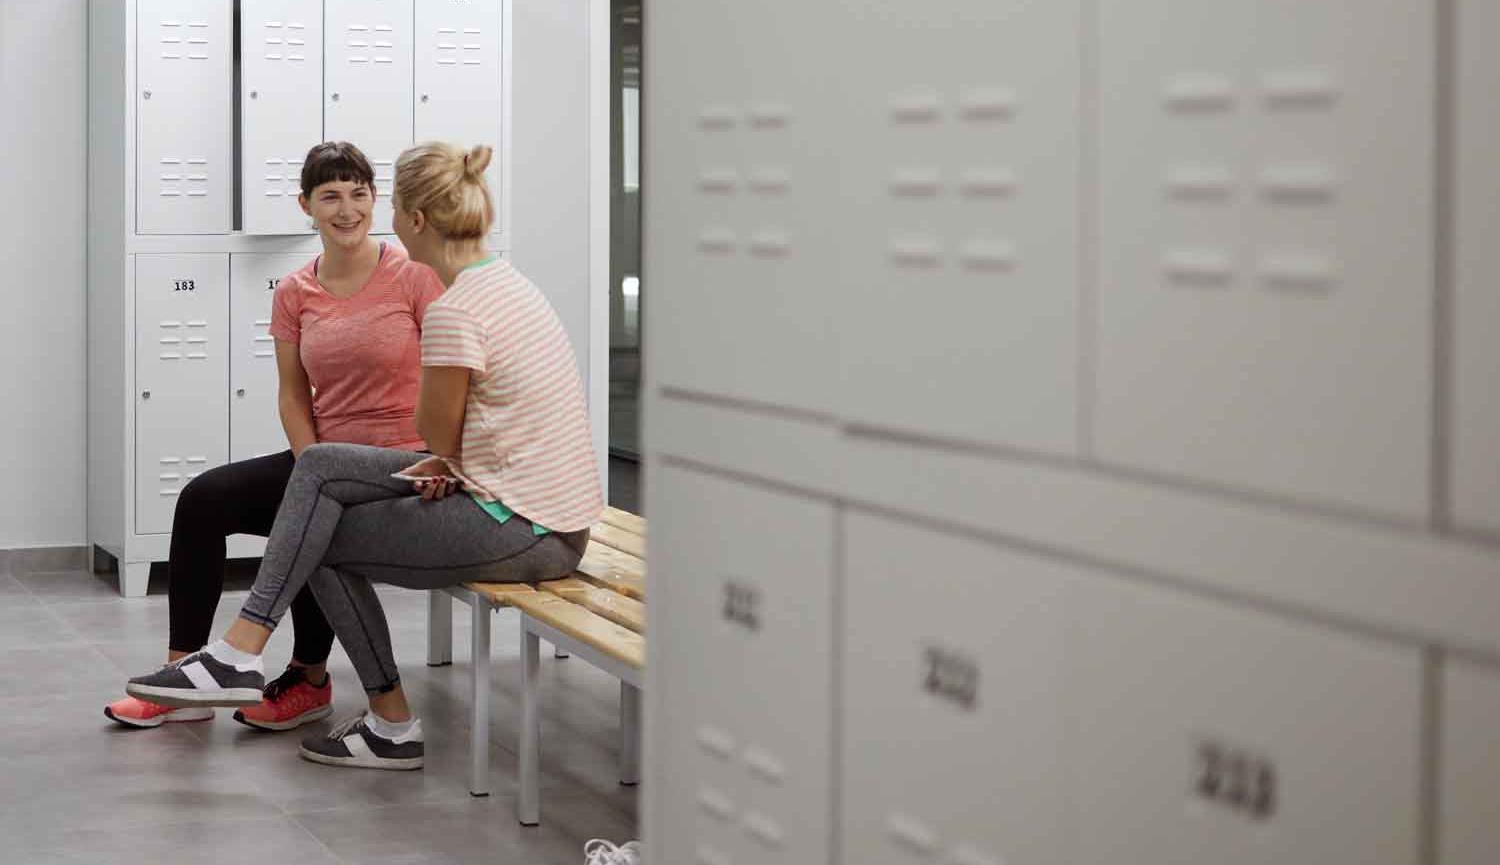 Photo of two women sitting  talking on bench in changing room with lockers around them